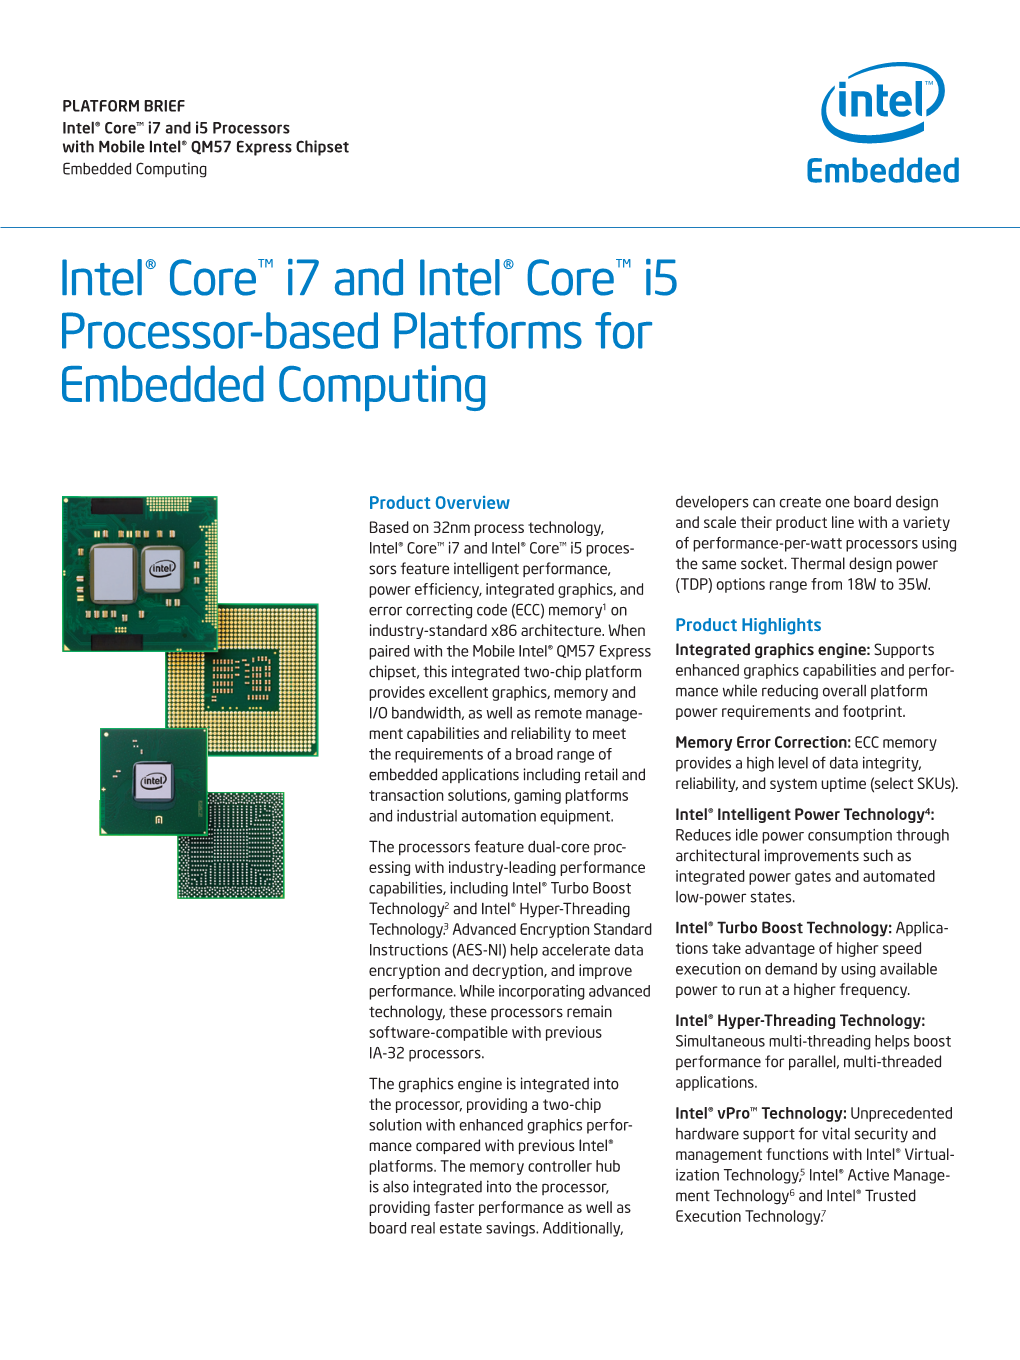 Intel® Core™ I7 and Intel® Core™ I5 Processor-Based Platforms for Embedded Computing